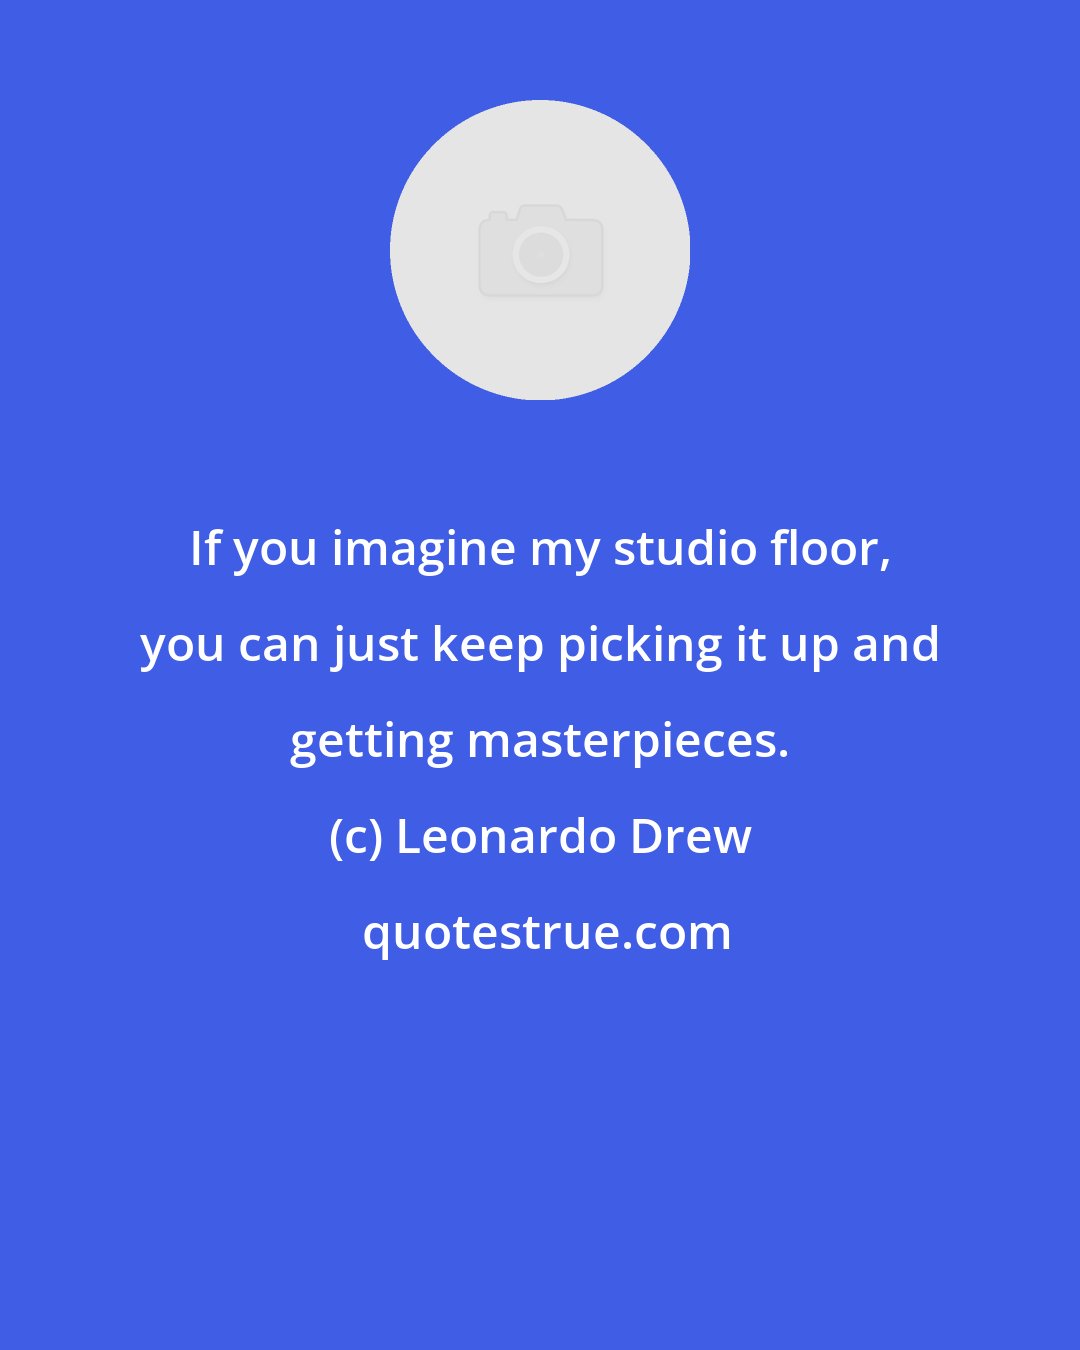 Leonardo Drew: If you imagine my studio floor, you can just keep picking it up and getting masterpieces.